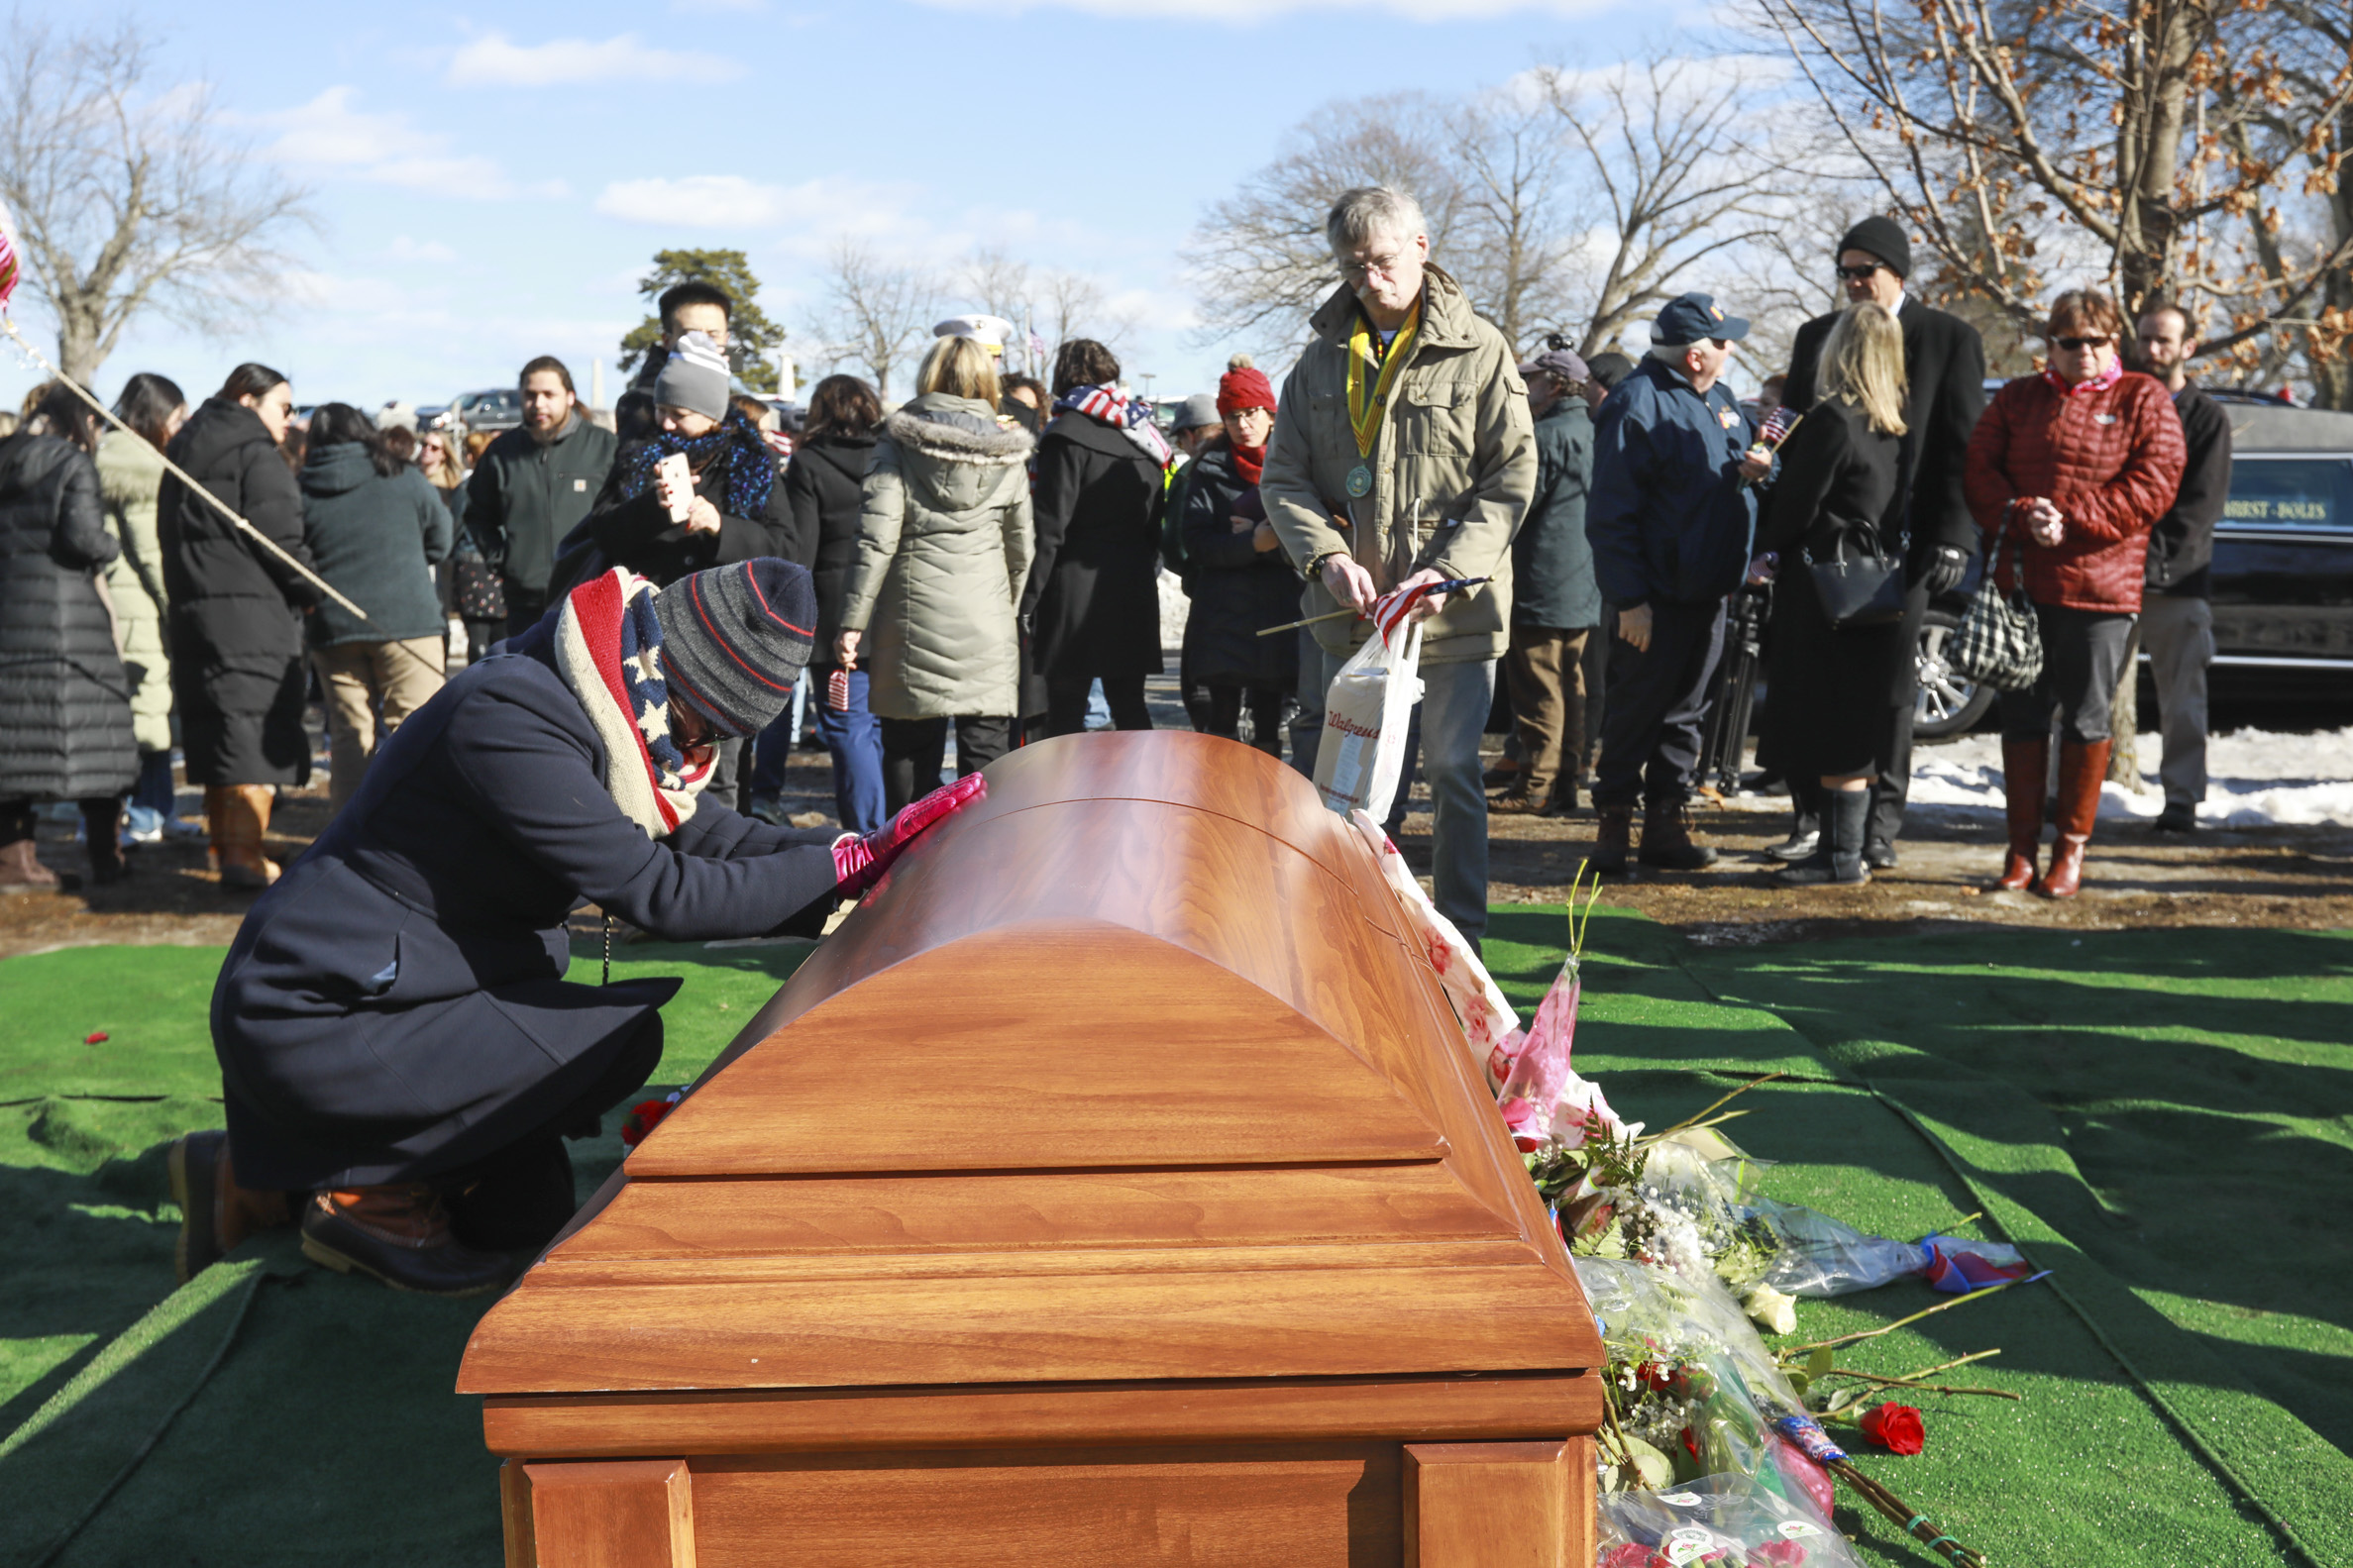 Hundreds attend the funeral for Army Veteran James McCue to pay their respects at the Bellevue Cemetery on Thursday, February 14, 2019 in Lawrence, Massachusetts. (MediaNews Group/Boston Herald vi&mdash;MediaNews Group via Getty Images)